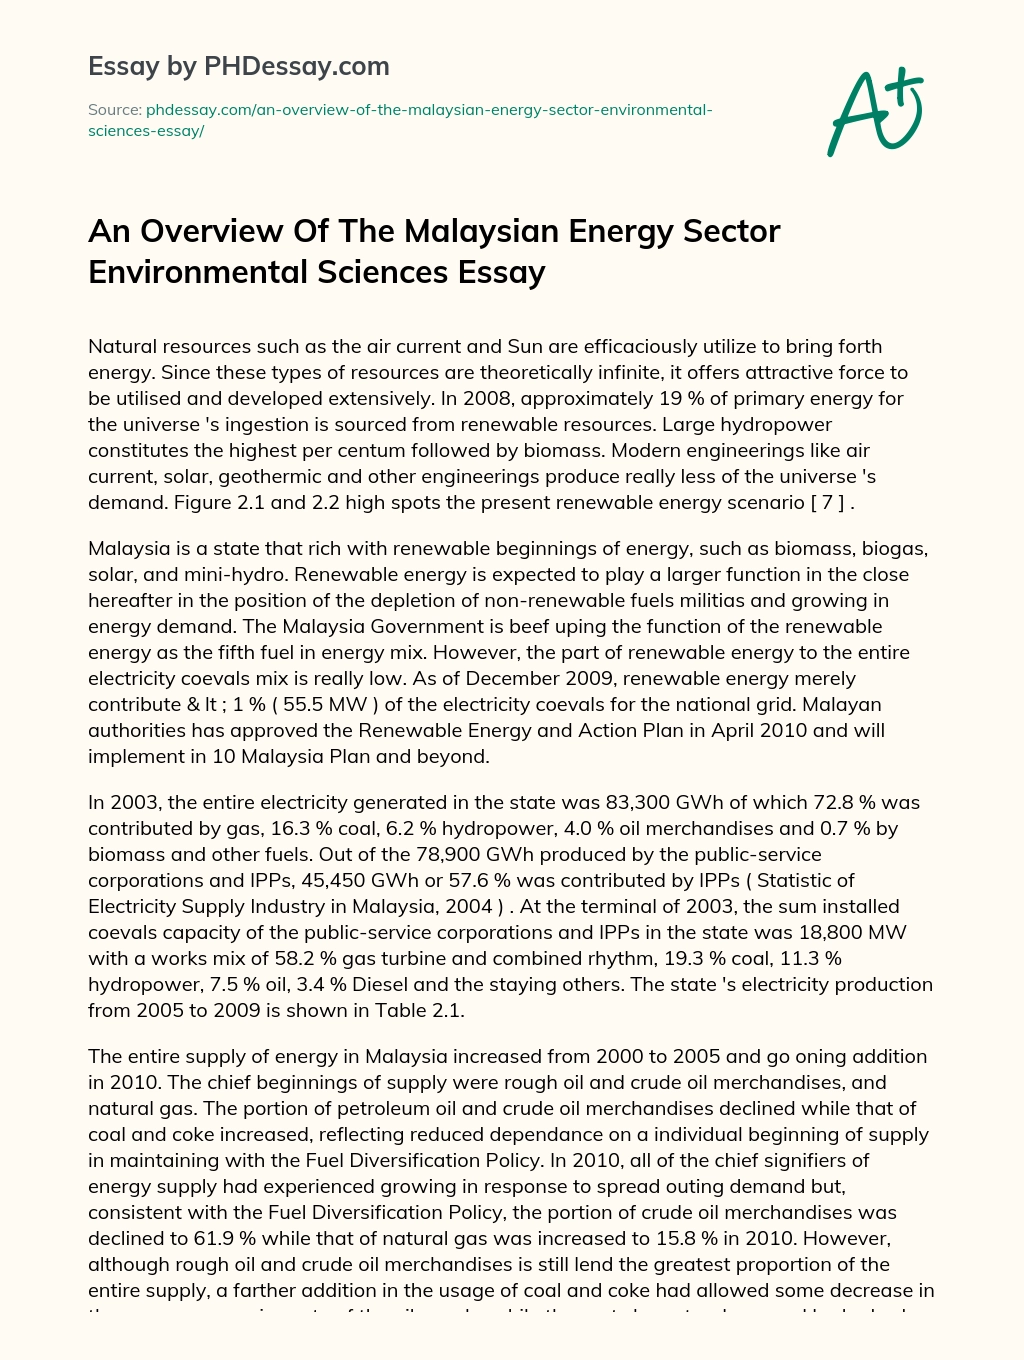 An Overview Of The Malaysian Energy Sector Environmental Sciences Essay essay